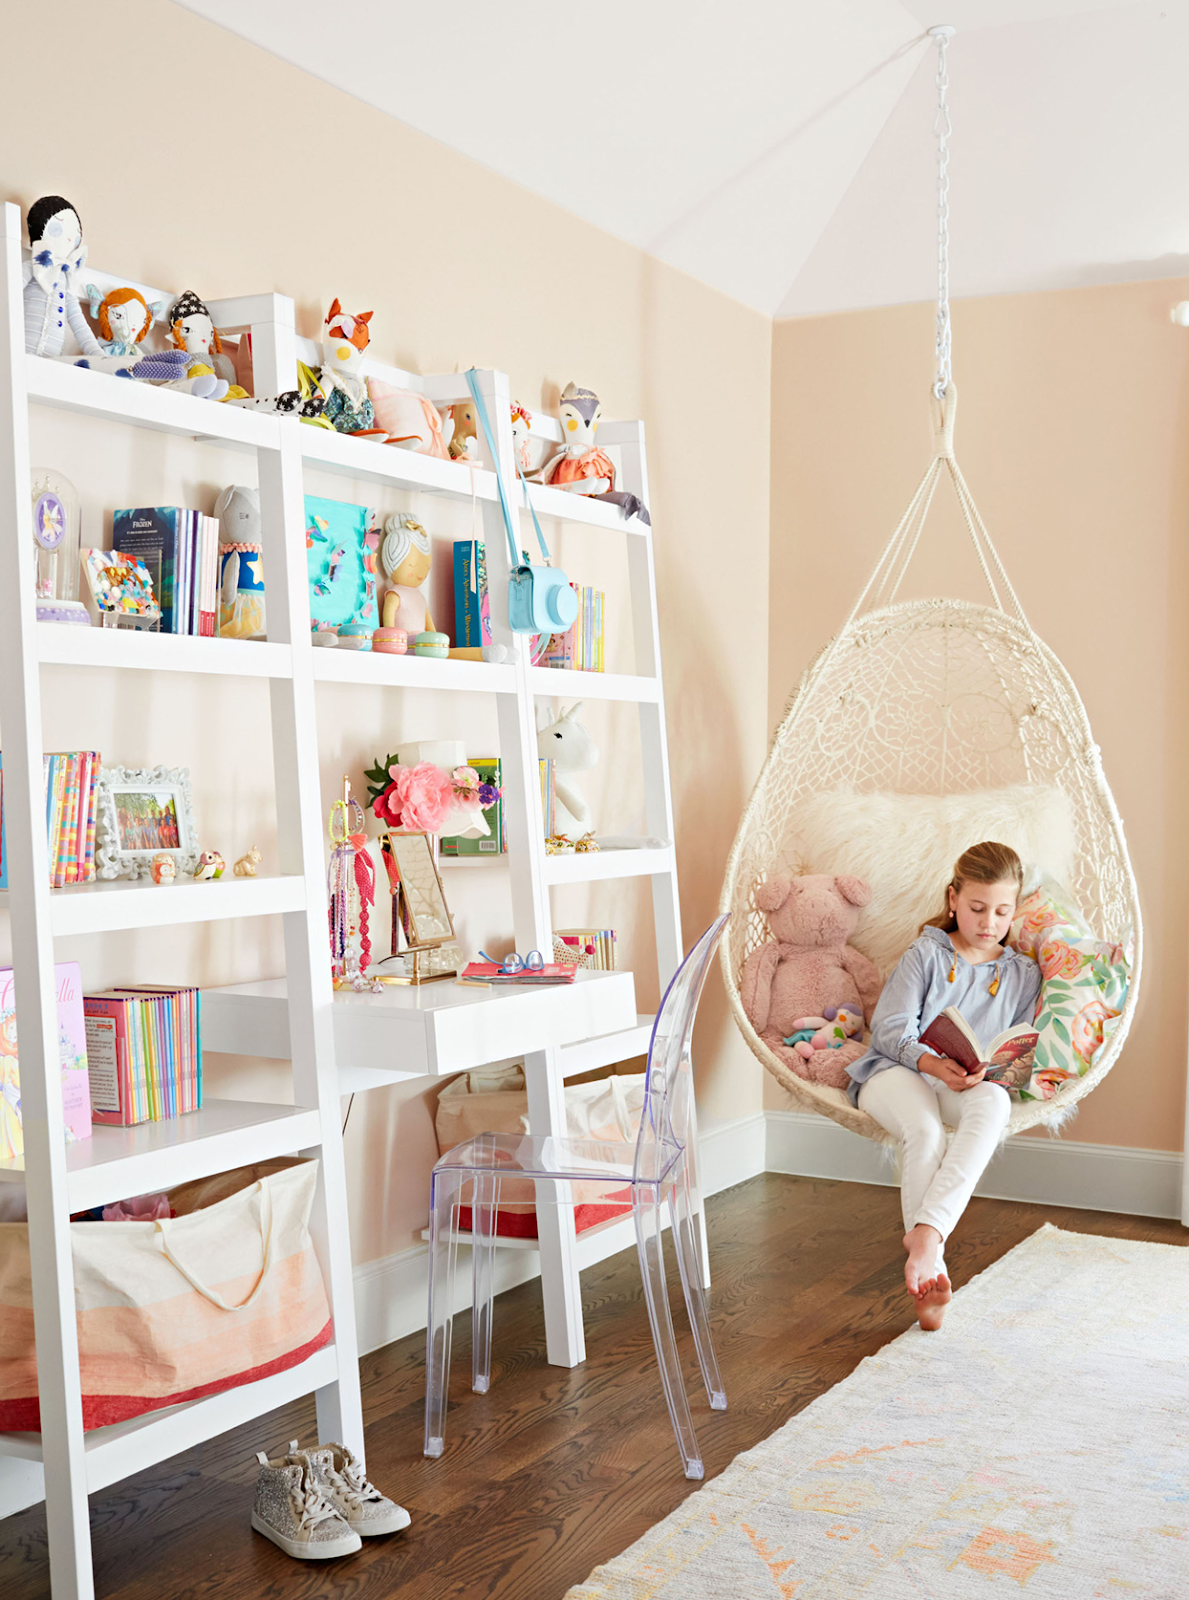 A child casually reading a book in a comfortable space at home